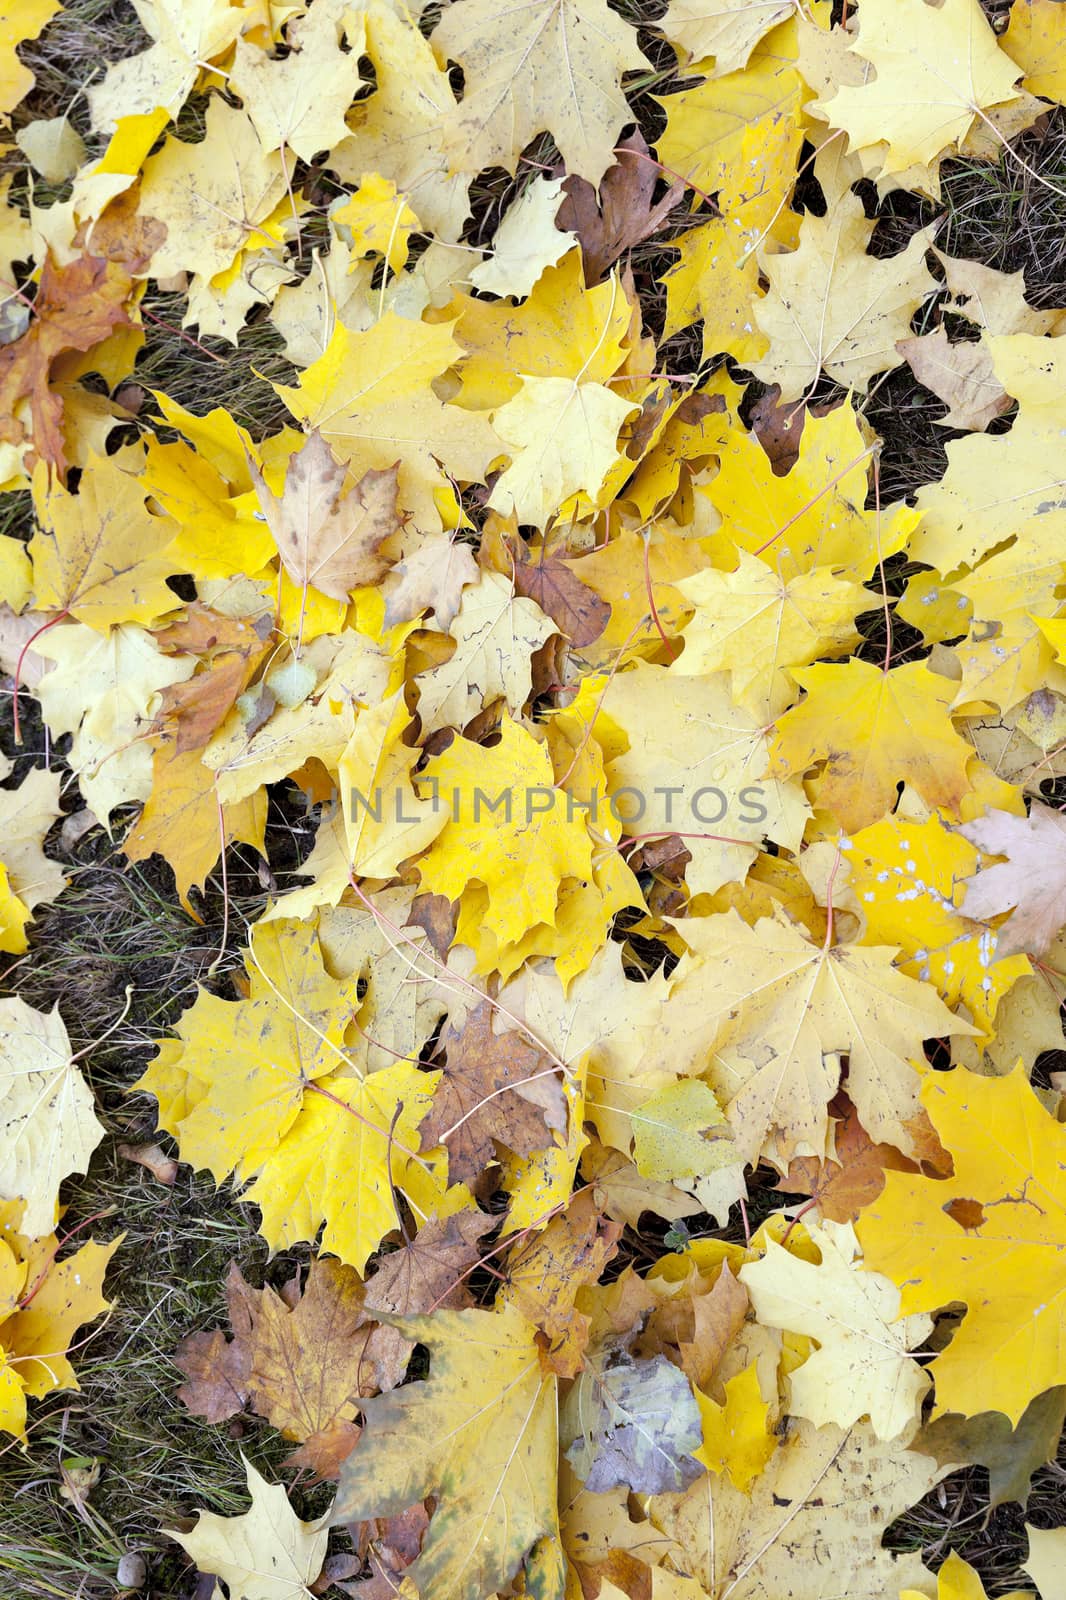 photographed trees and foliage in the autumn, the location - a park,